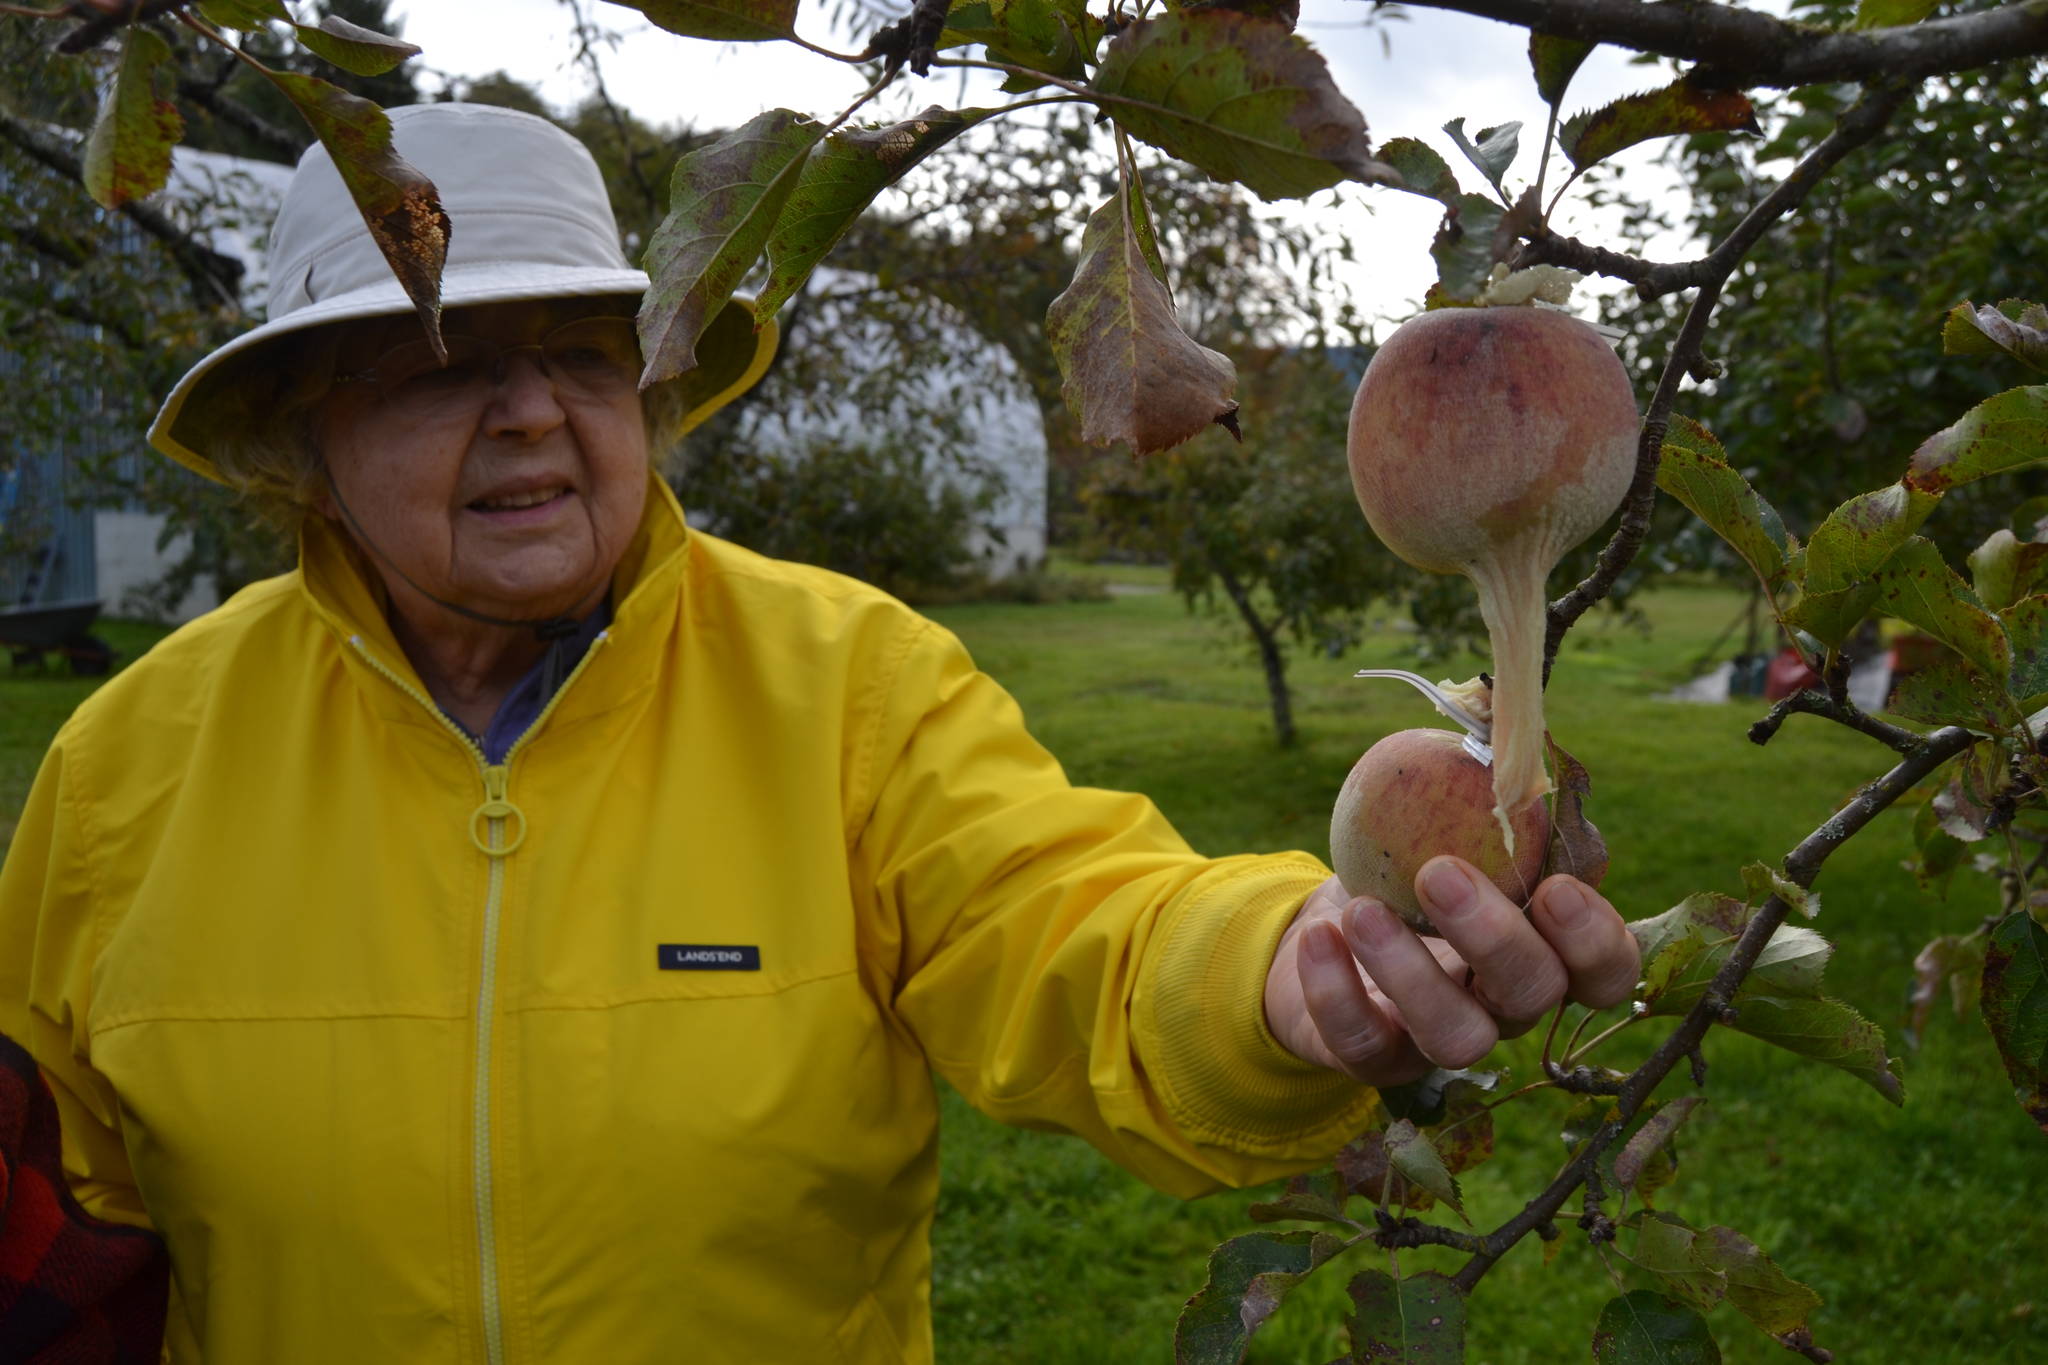 Leilani Kingsbury holds one of her covered apples that she placed a nylon over to prevent bugs. Over the years, she’s learned to dehydrate fruit, press apples into cider, can fruit and more with her husband Alan. Sequim Gazette photo by Matthew Nash